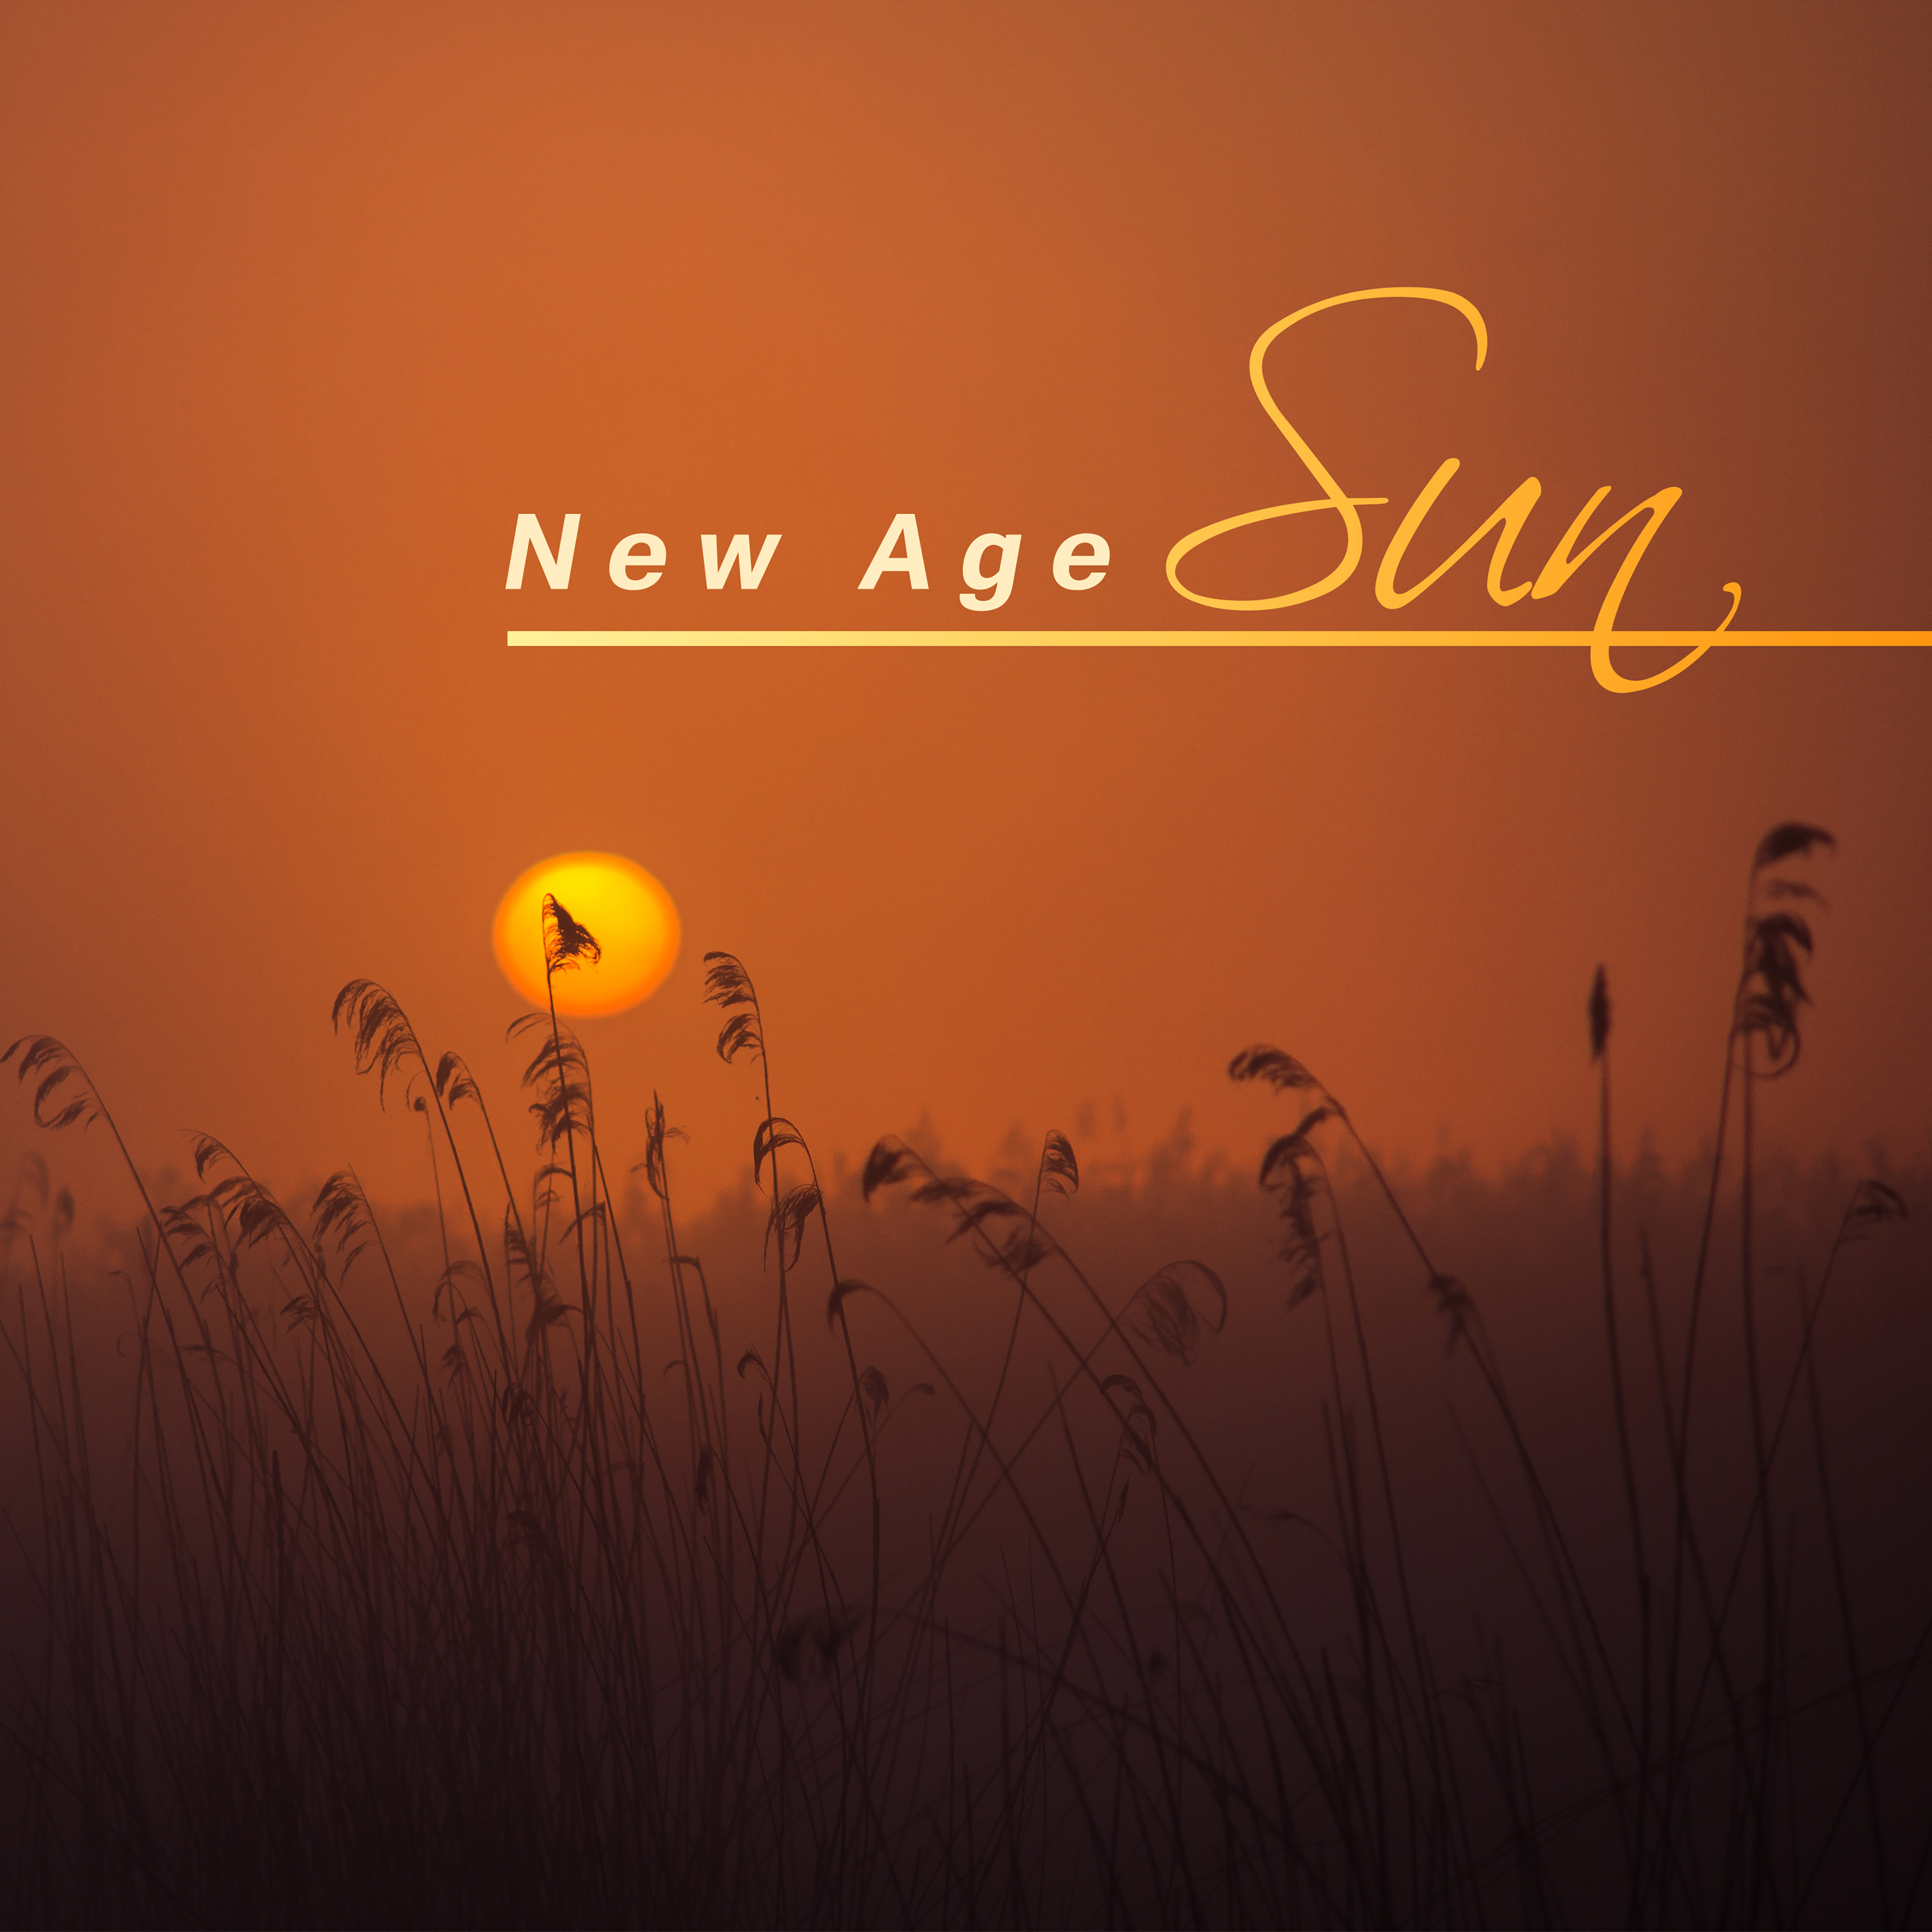 New Age Sun  Relaxation Music, New Age 2017, New Album, Healing Nature Music